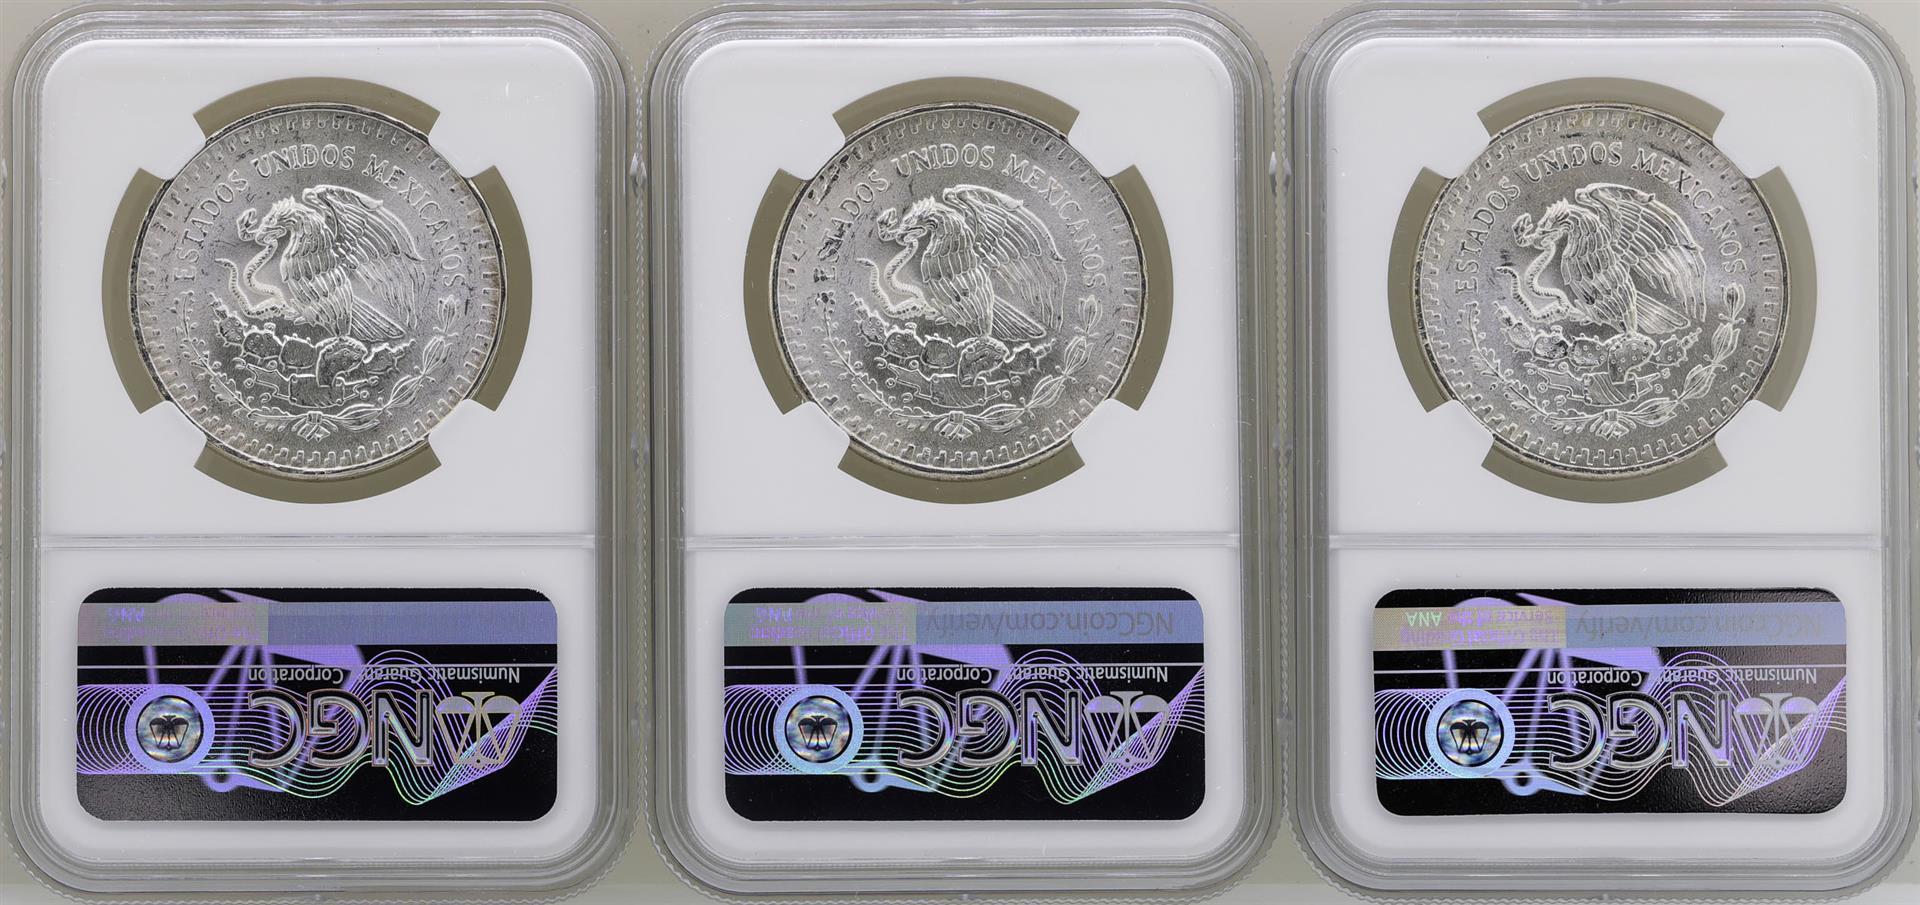 Lot of (3) 1983Mo Mexico Libertad Onza Silver Coins NGC MS65